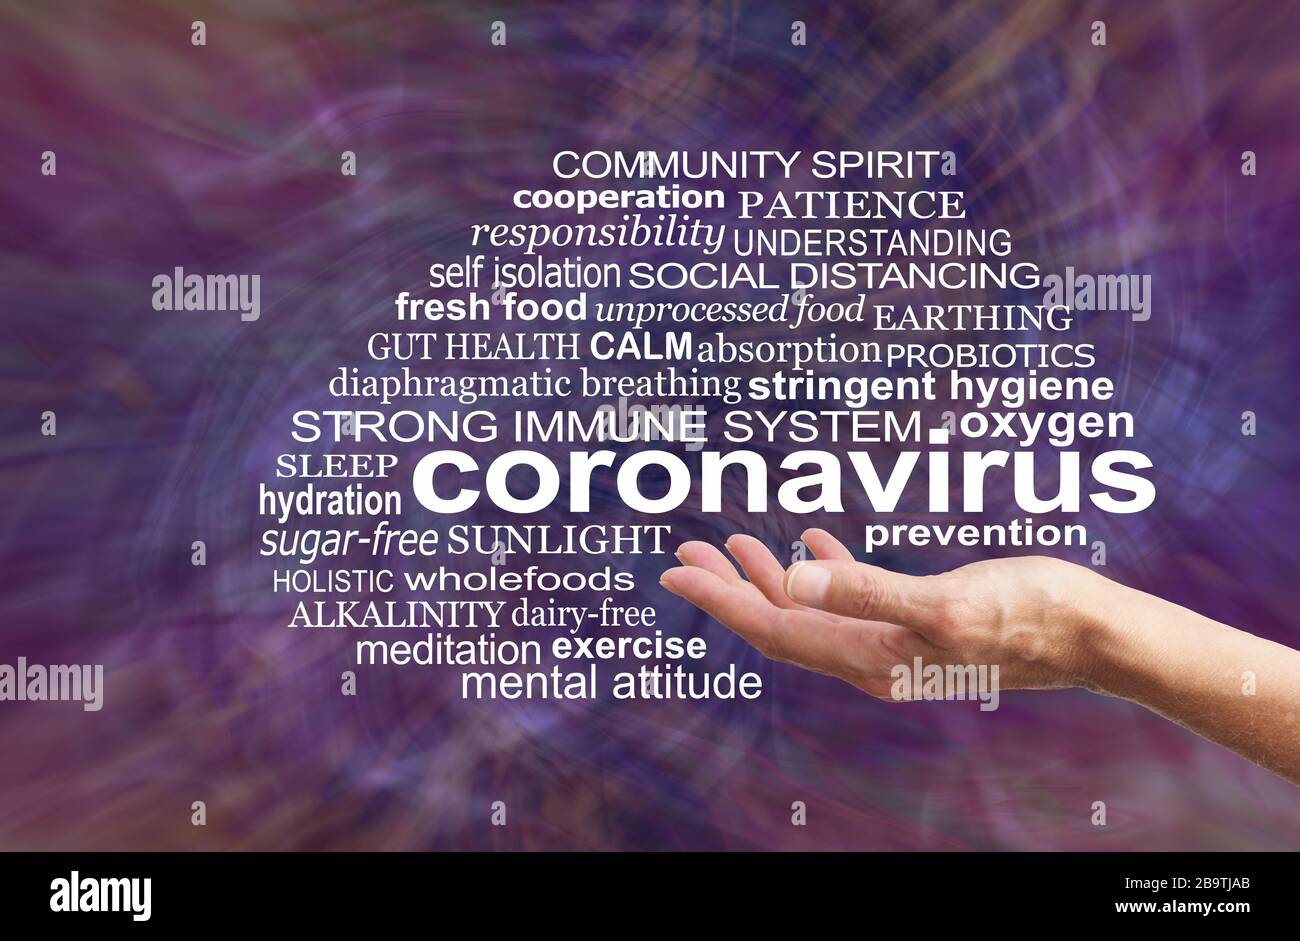 Coronavirus prevention word cloud - female open palm hand with the words CORONAVIRUS PREVENTION surrounded by a relevant word cloud Stock Photo